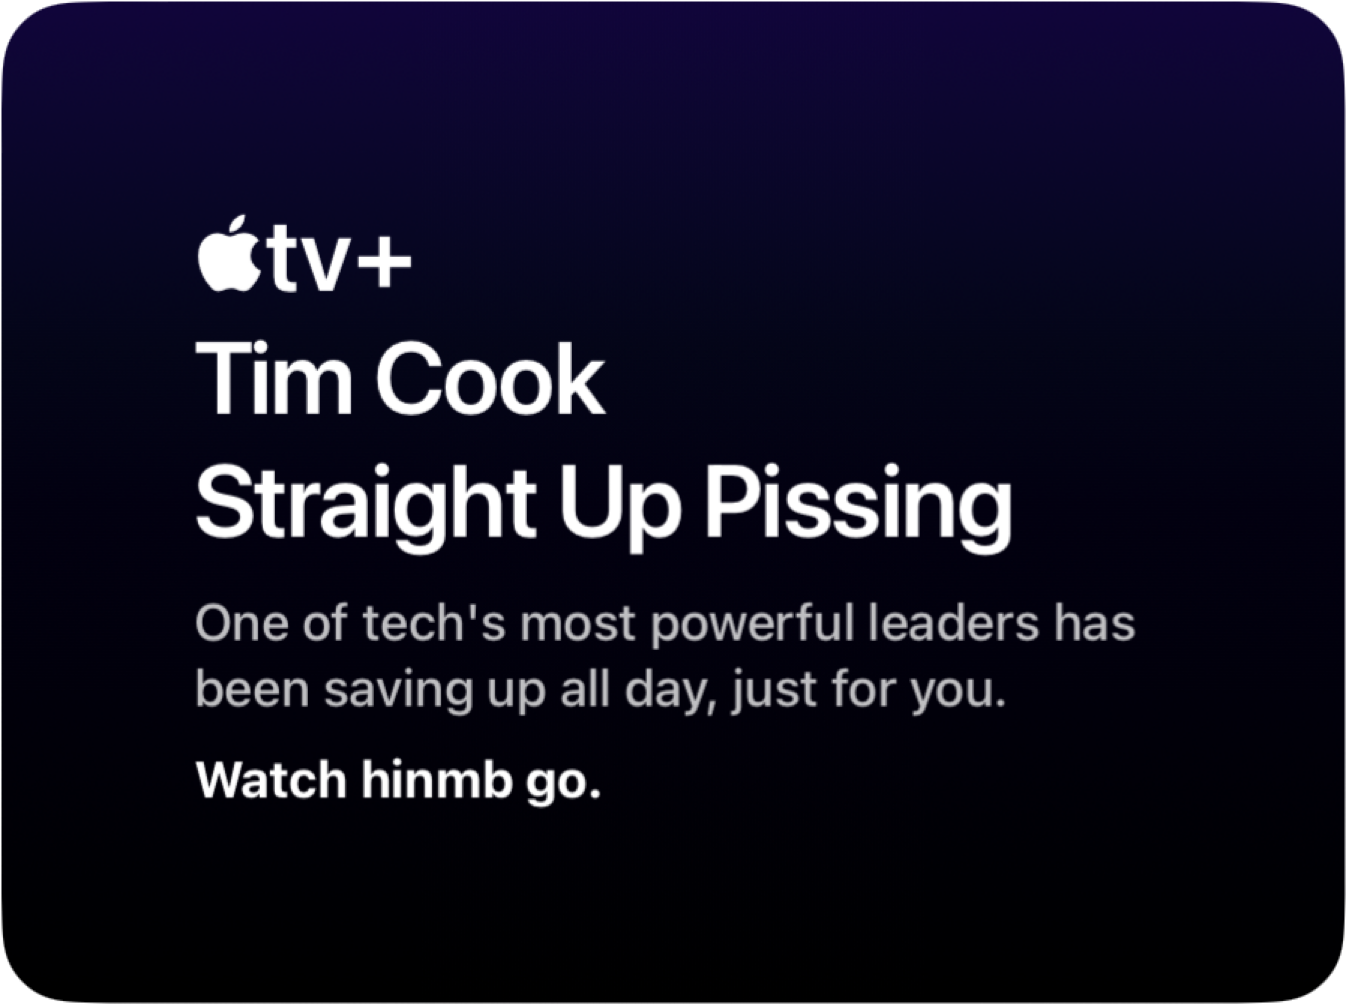 Promotional graphic for Apple TV+ with text that may contain inappropriate or altered content not officially associated with the mentioned service.